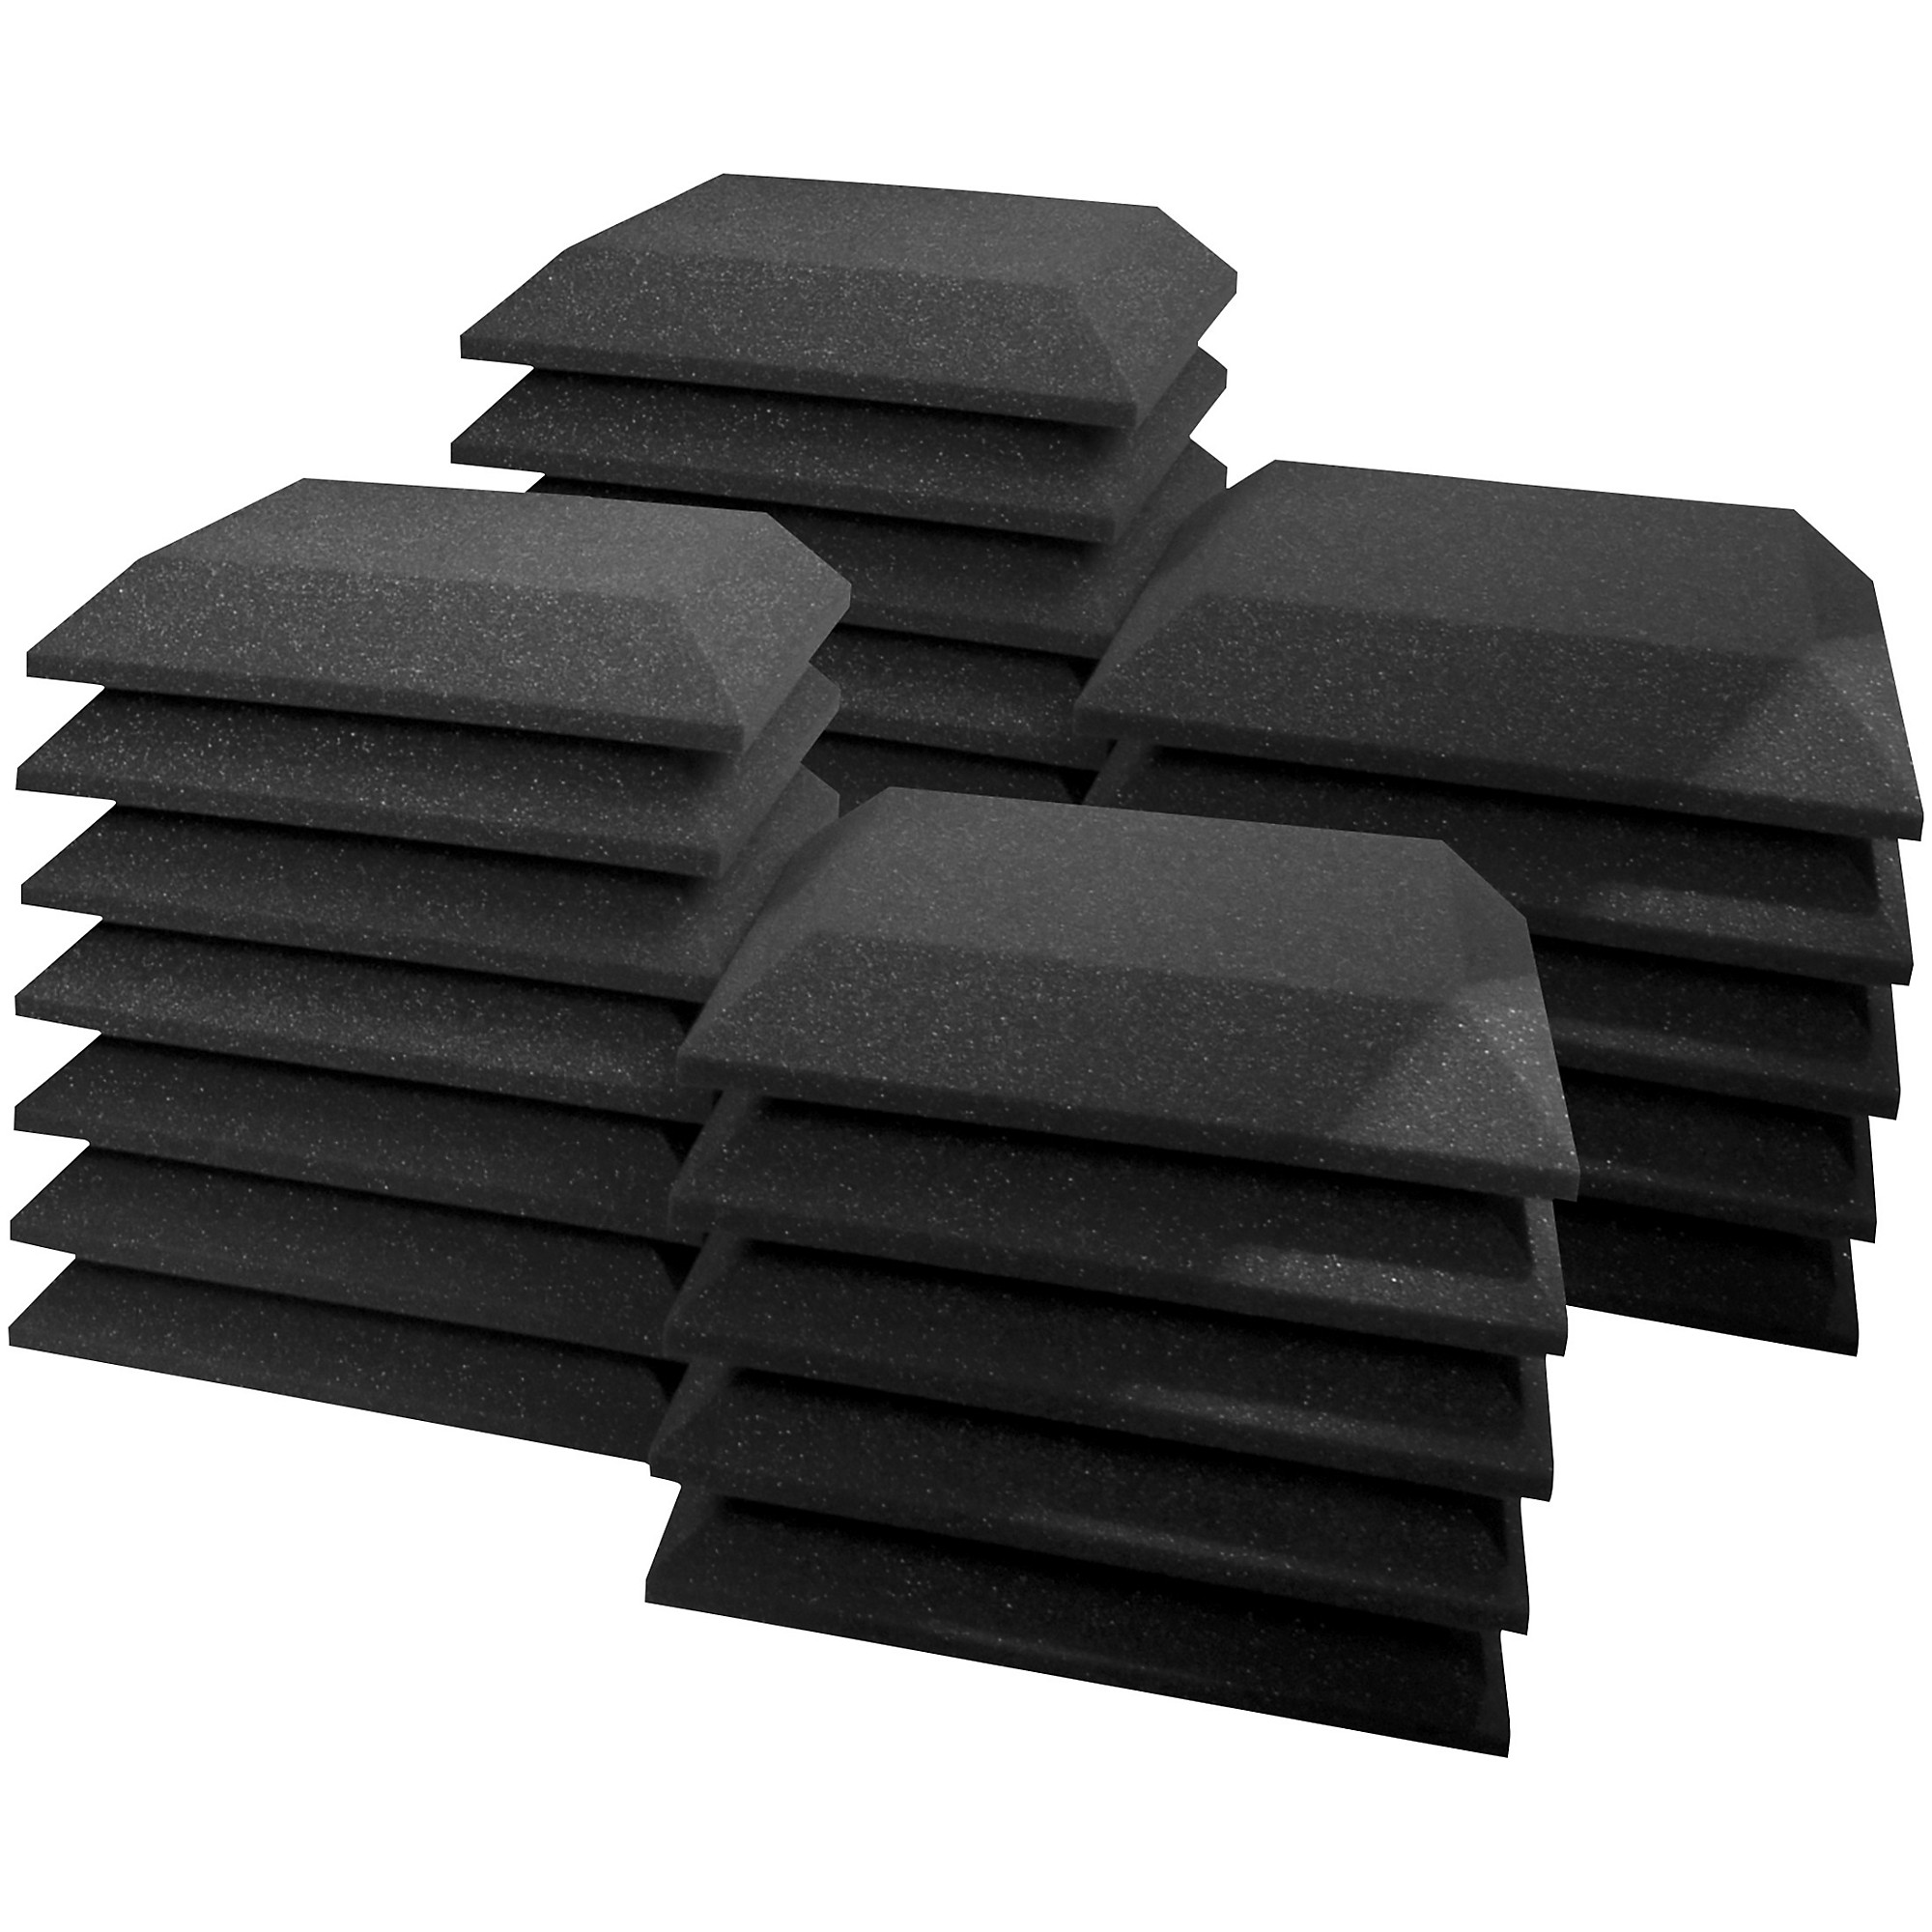 6 Pairs SPC205 Coverking Ultimate 17609 MC Acoustics UA-WPW-12 Wedge-Style Wall Panel 12x12x2 Professional Acoustic Foam with Mounting Tabs Included 